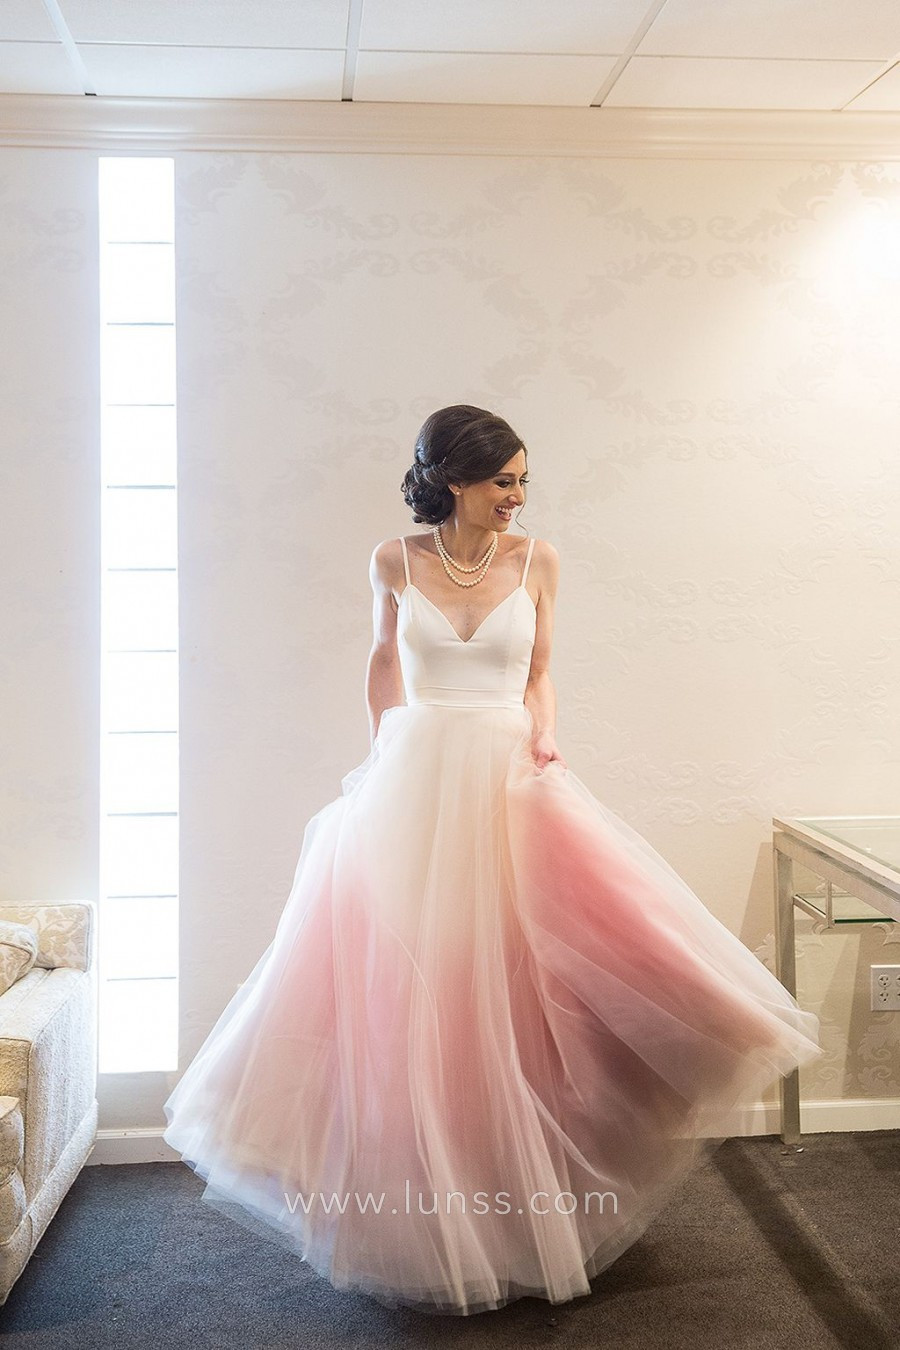 White And Pink Wedding Dress
 White and Pink Ombre V Neck Gra nt Wedding Dress Lunss